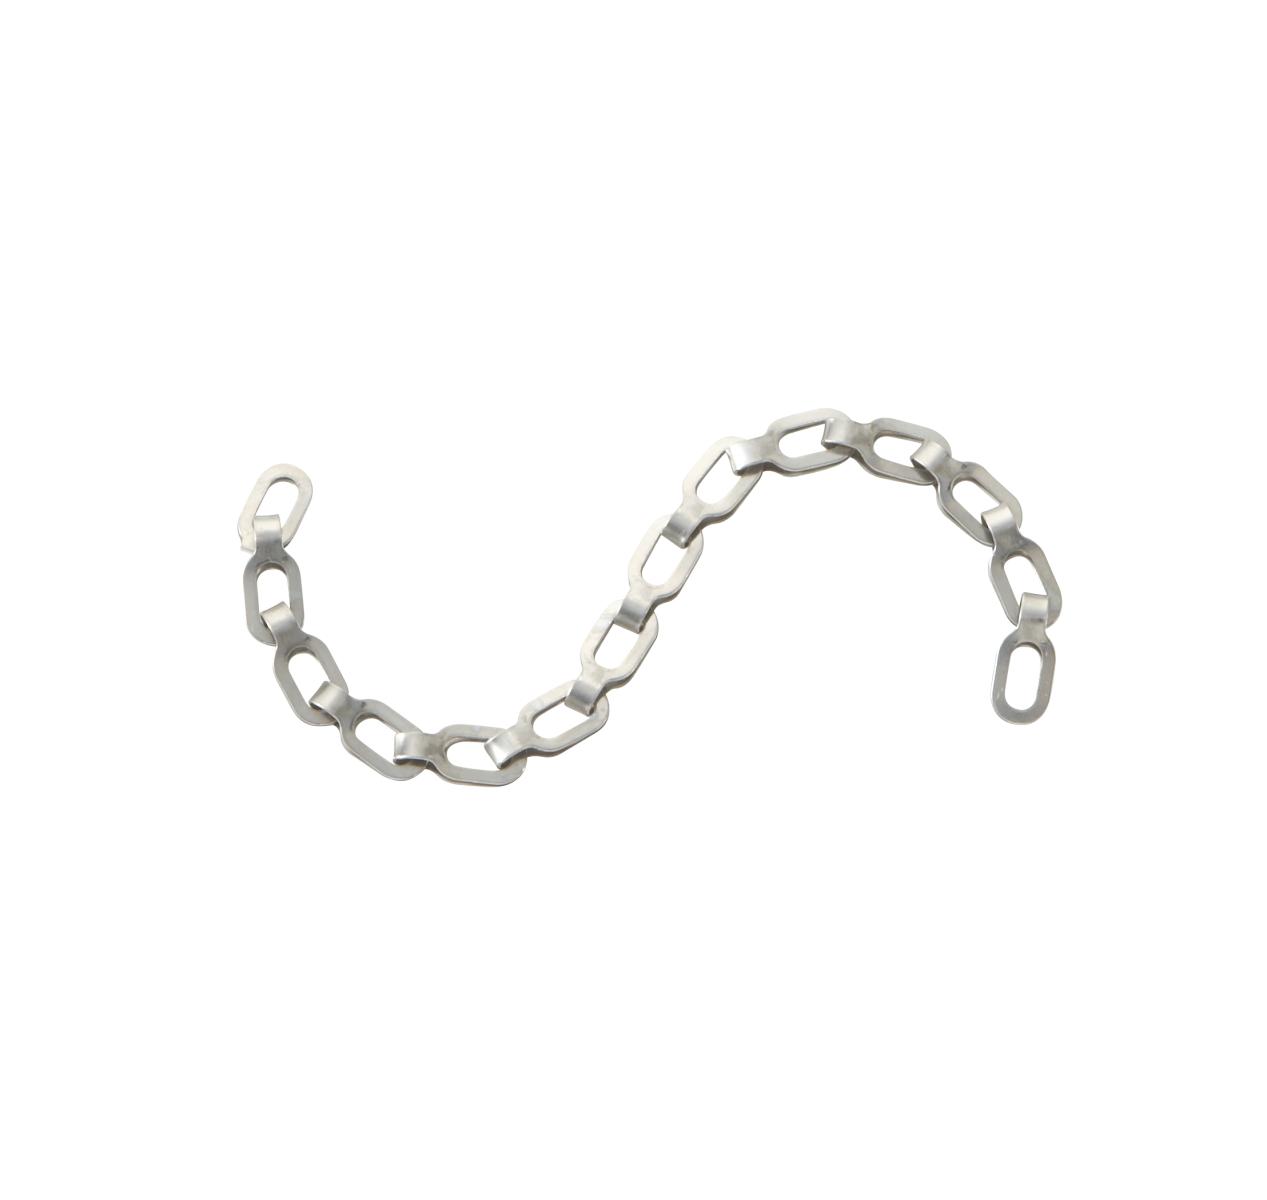 TapeTech® Creaser Chain. Part number 050145